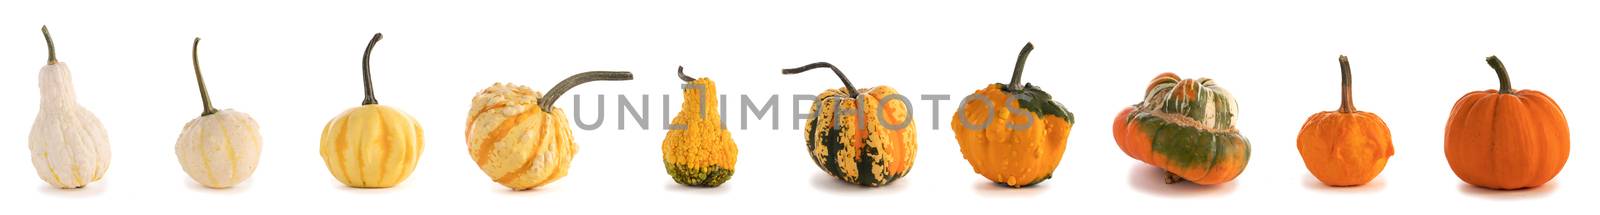 Diverse pumpkins on white background by Yellowj